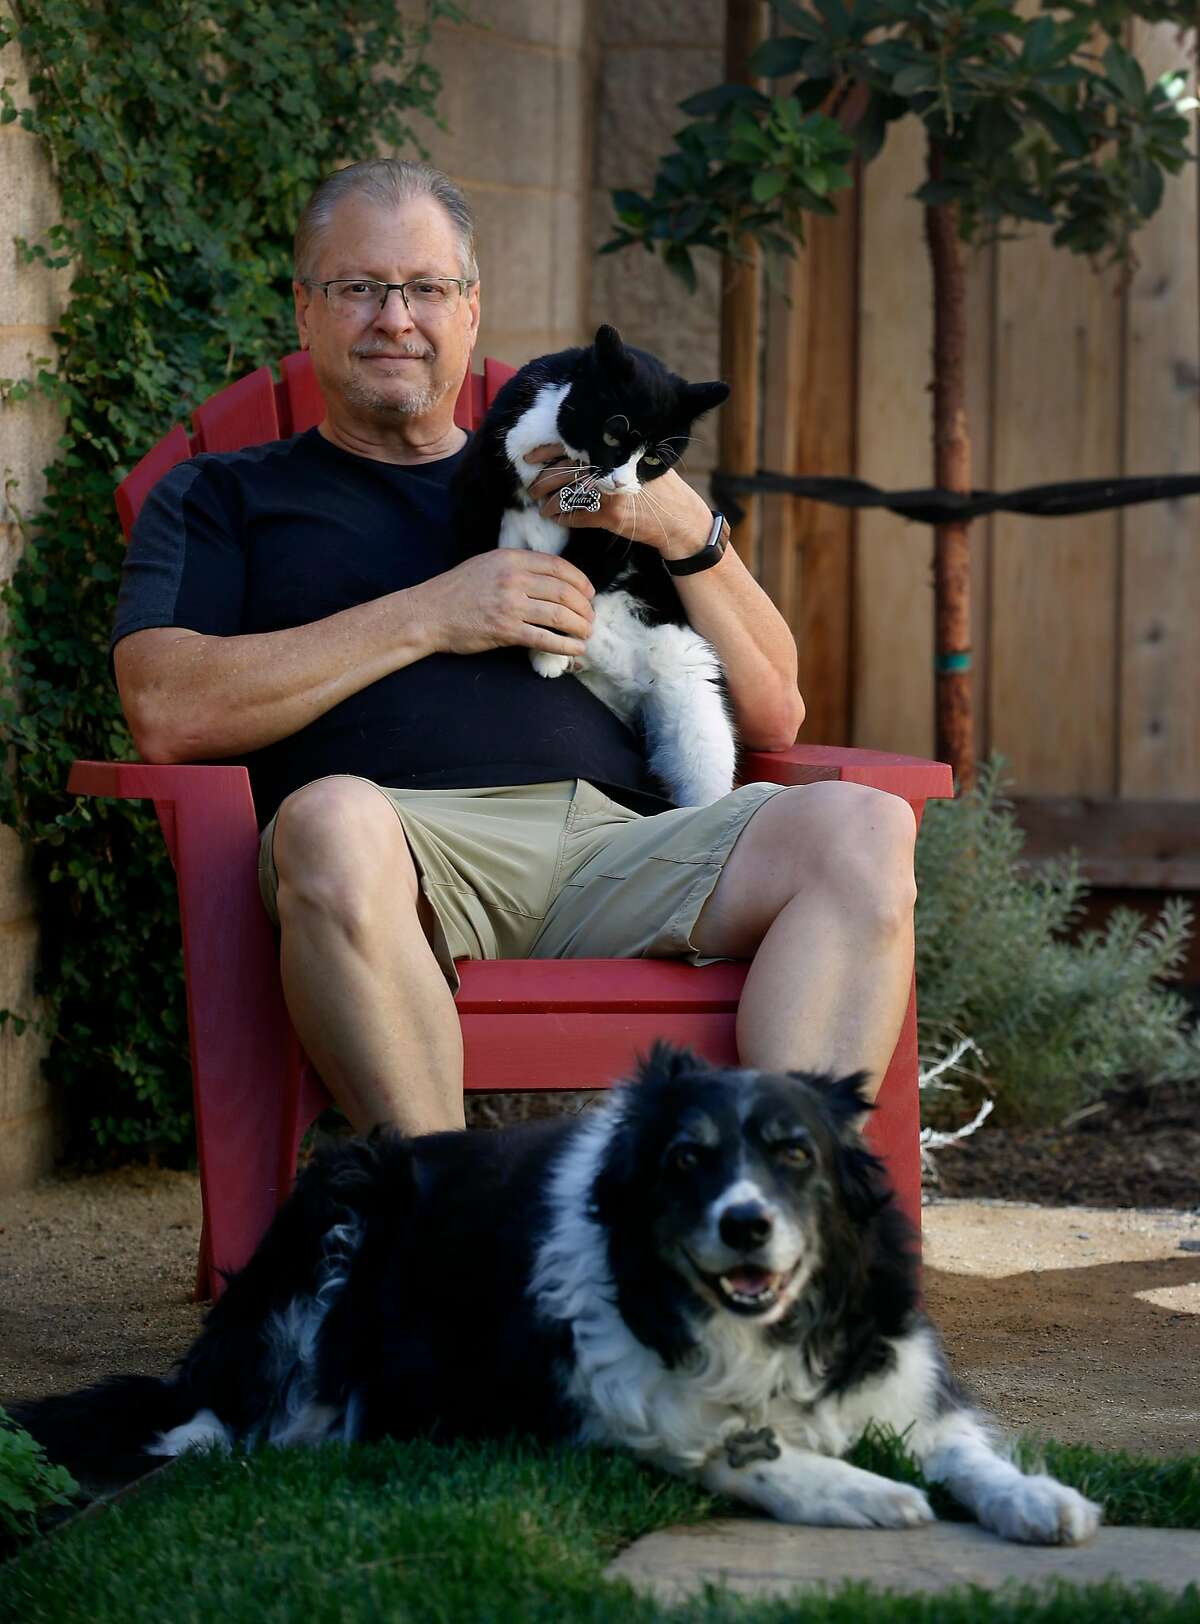 Rick Sullivan relaxes with his cat Nikkita and border collie Frisbee in the backyard of his home in Brentwood, Calif. on Thursday, Sept. 24, 2020. Sullivan is still experiencing long term effects after recovering from COVID-19, which he contracted in June, and suffers what he described as "brain fog".